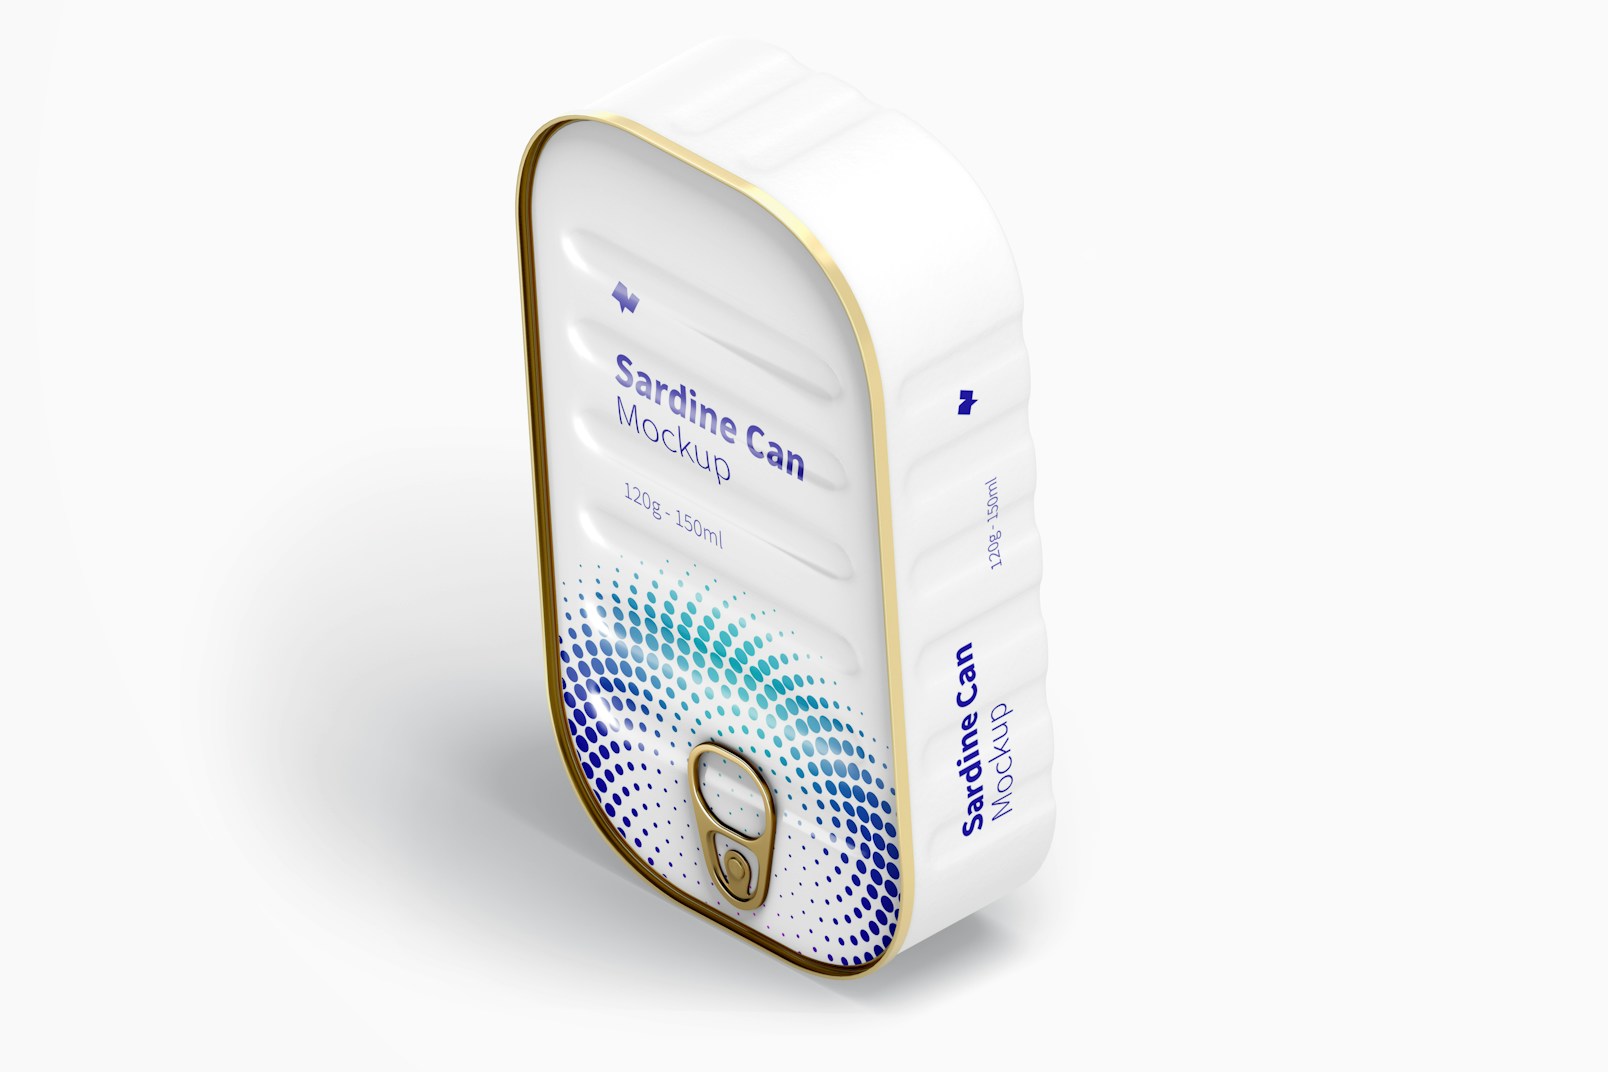 120g Sardine Can Mockup, Isometric Vertical Left View